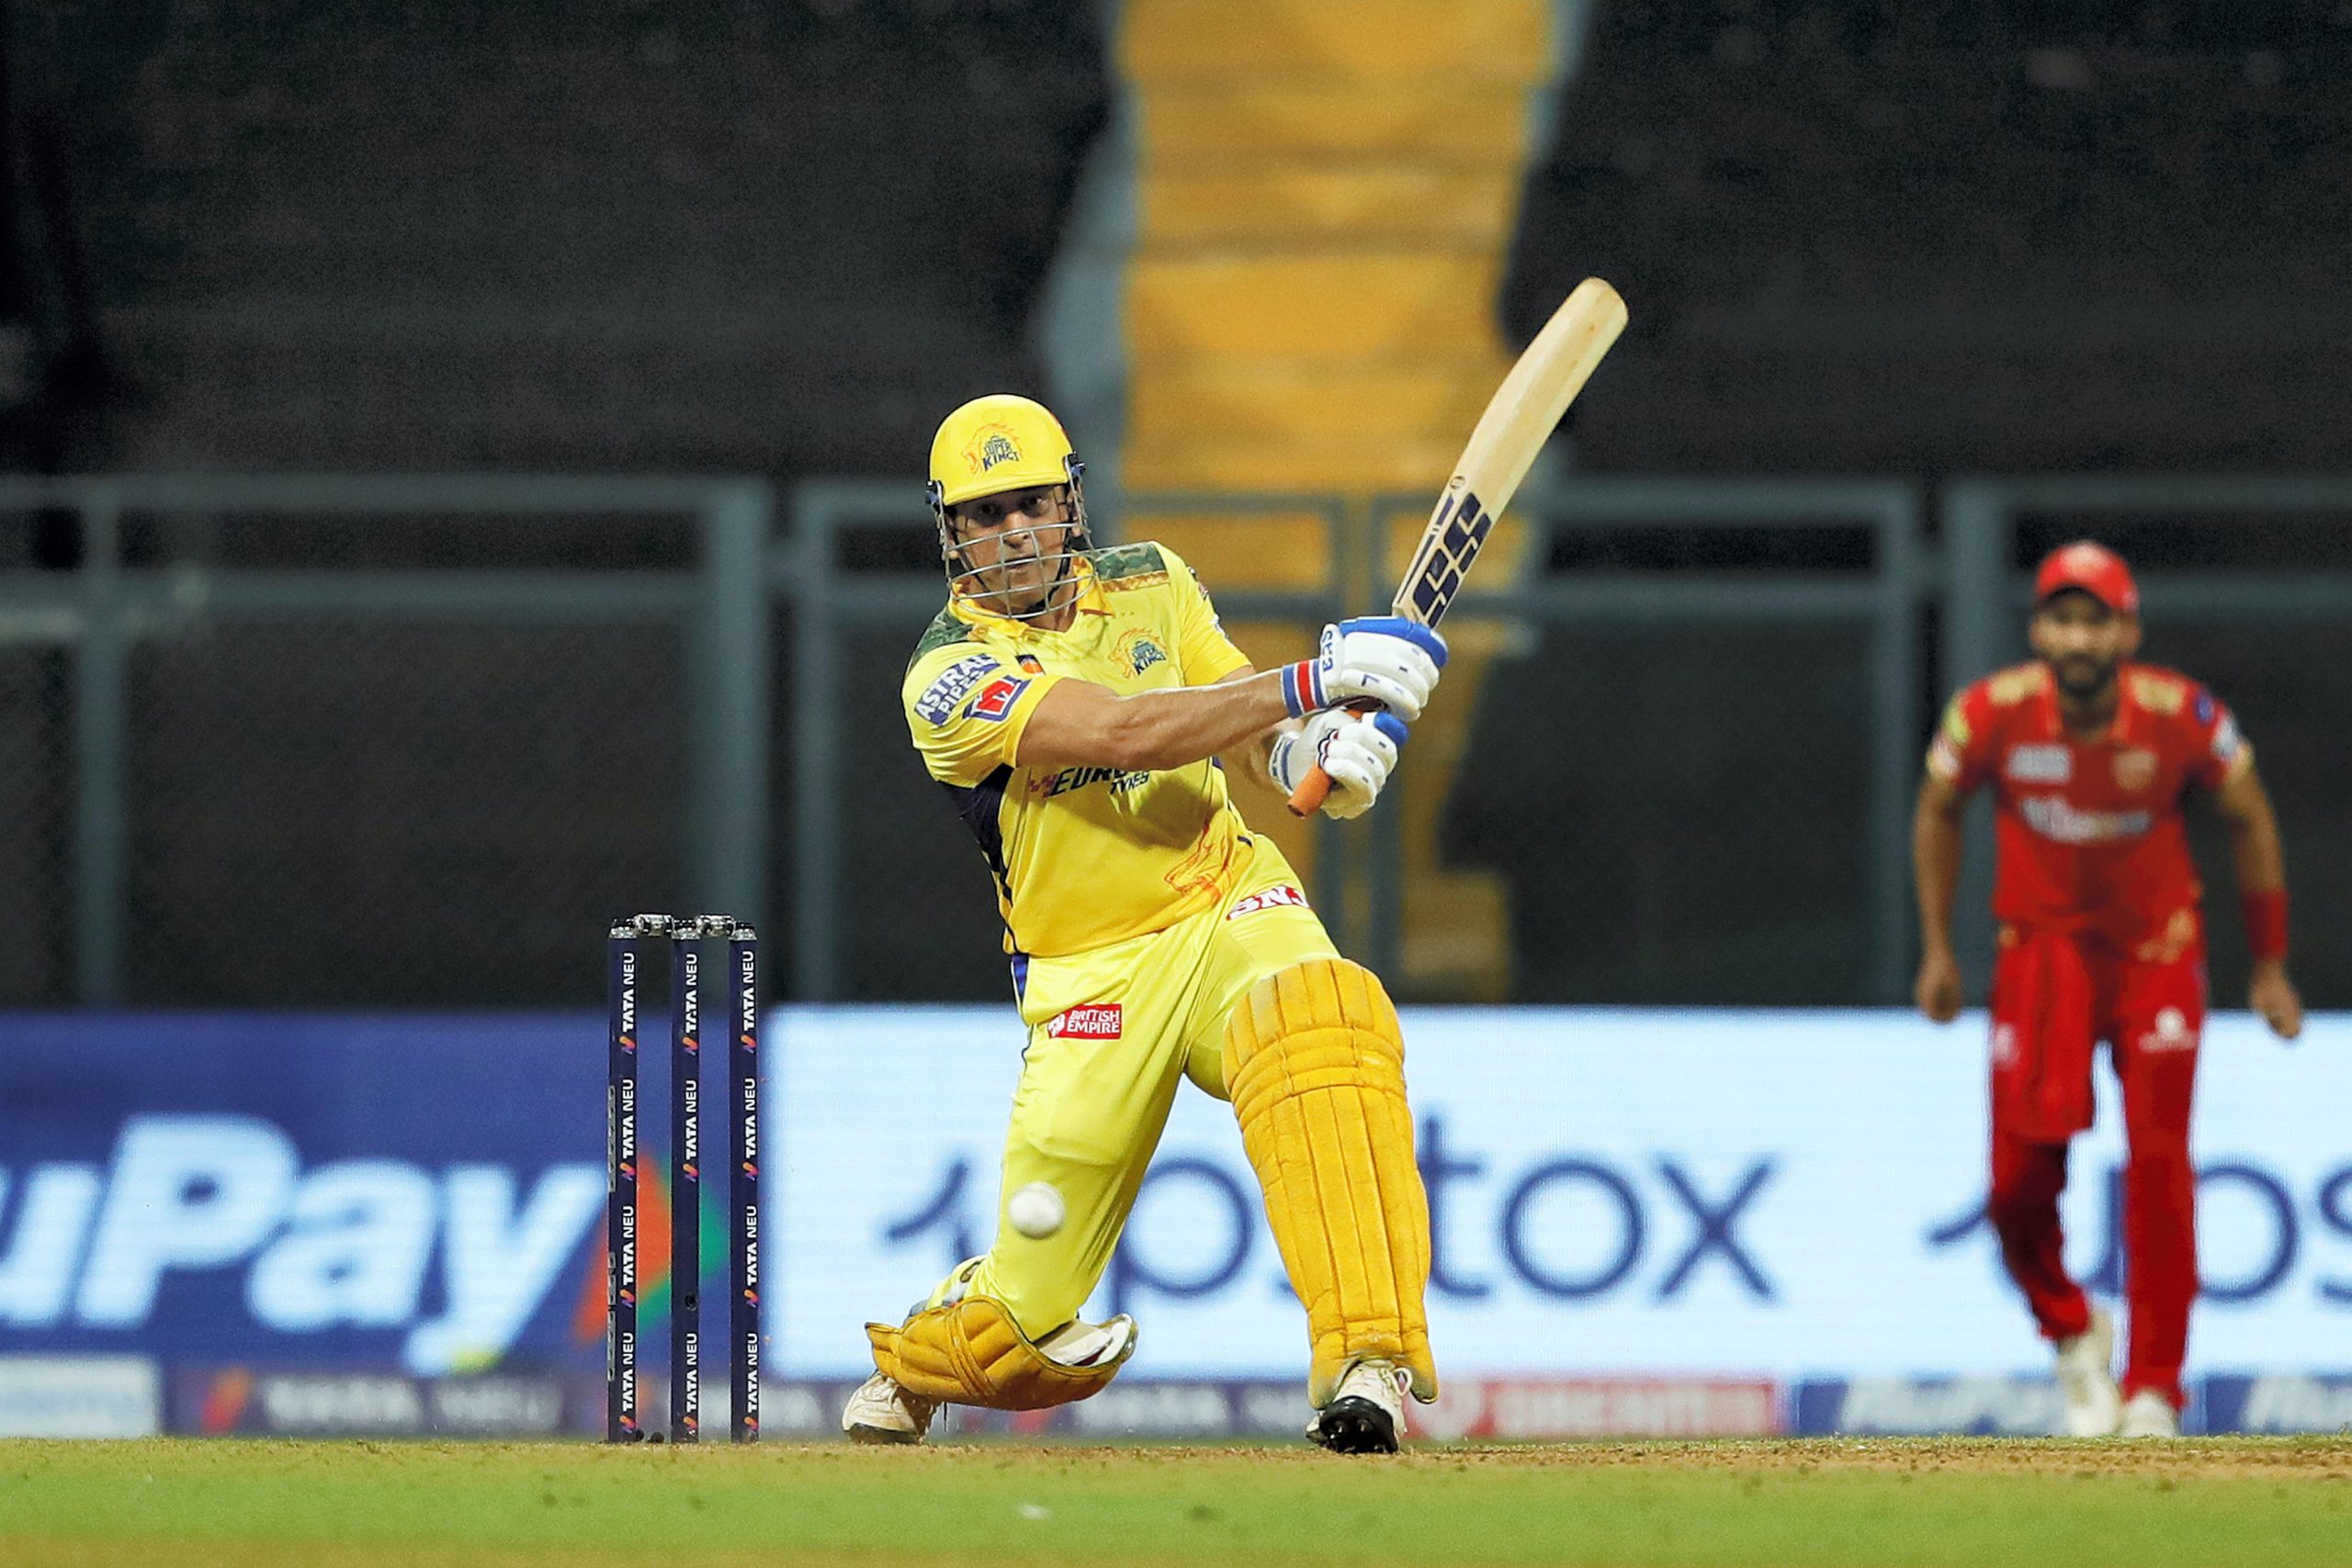 IPL 2022: Chennai Super Kings couldn’t move on from MS Dhoni